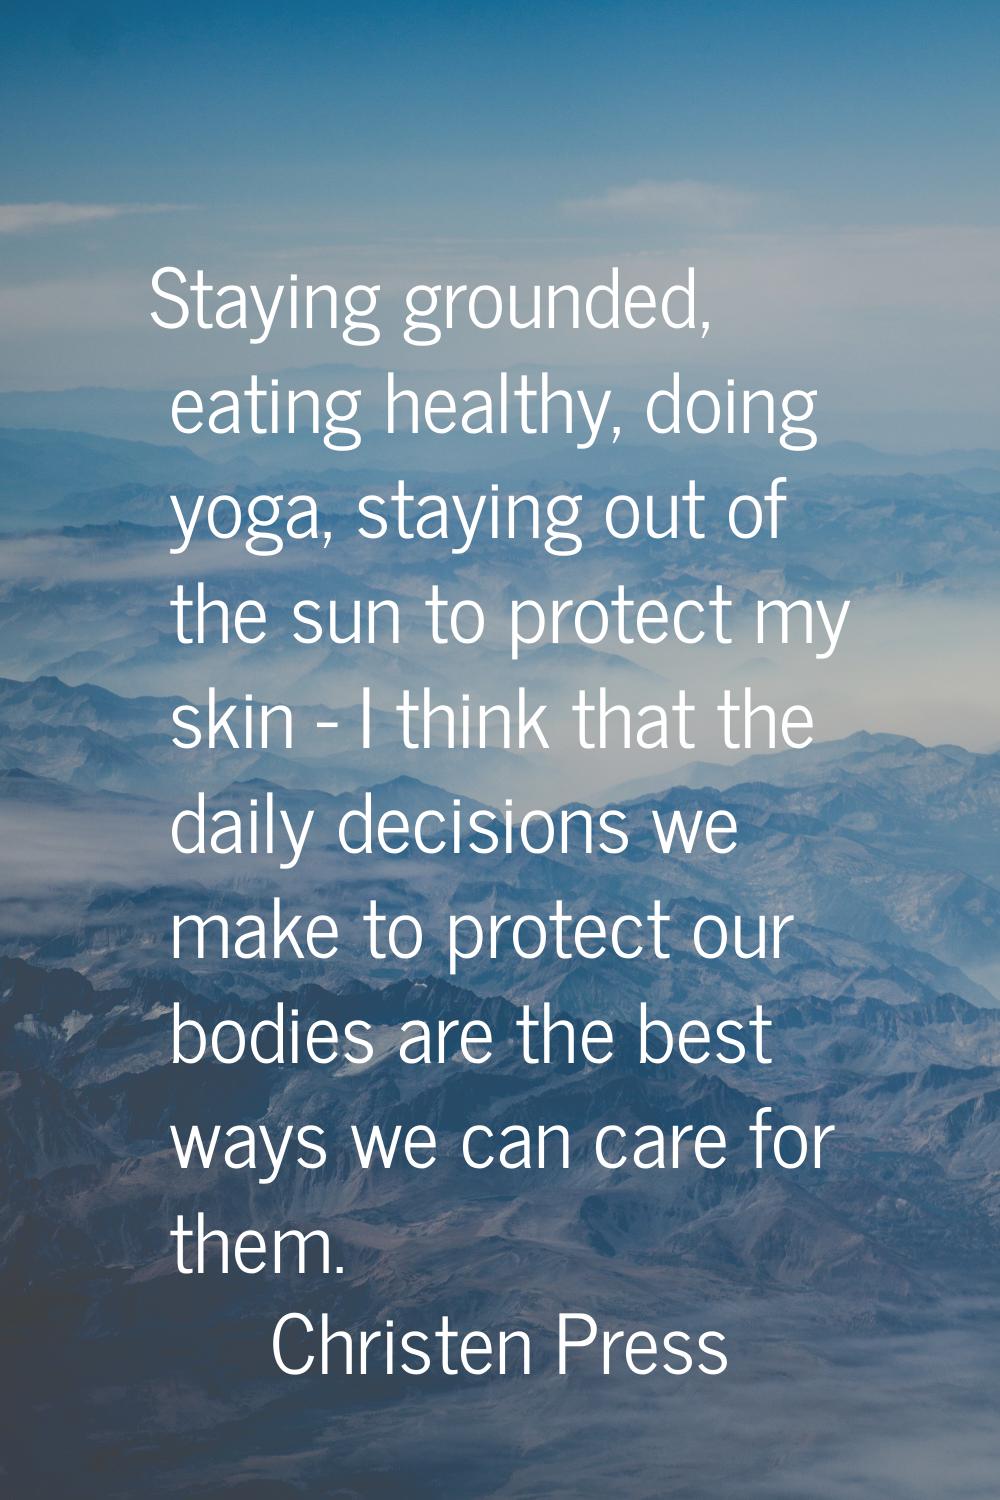 Staying grounded, eating healthy, doing yoga, staying out of the sun to protect my skin - I think t